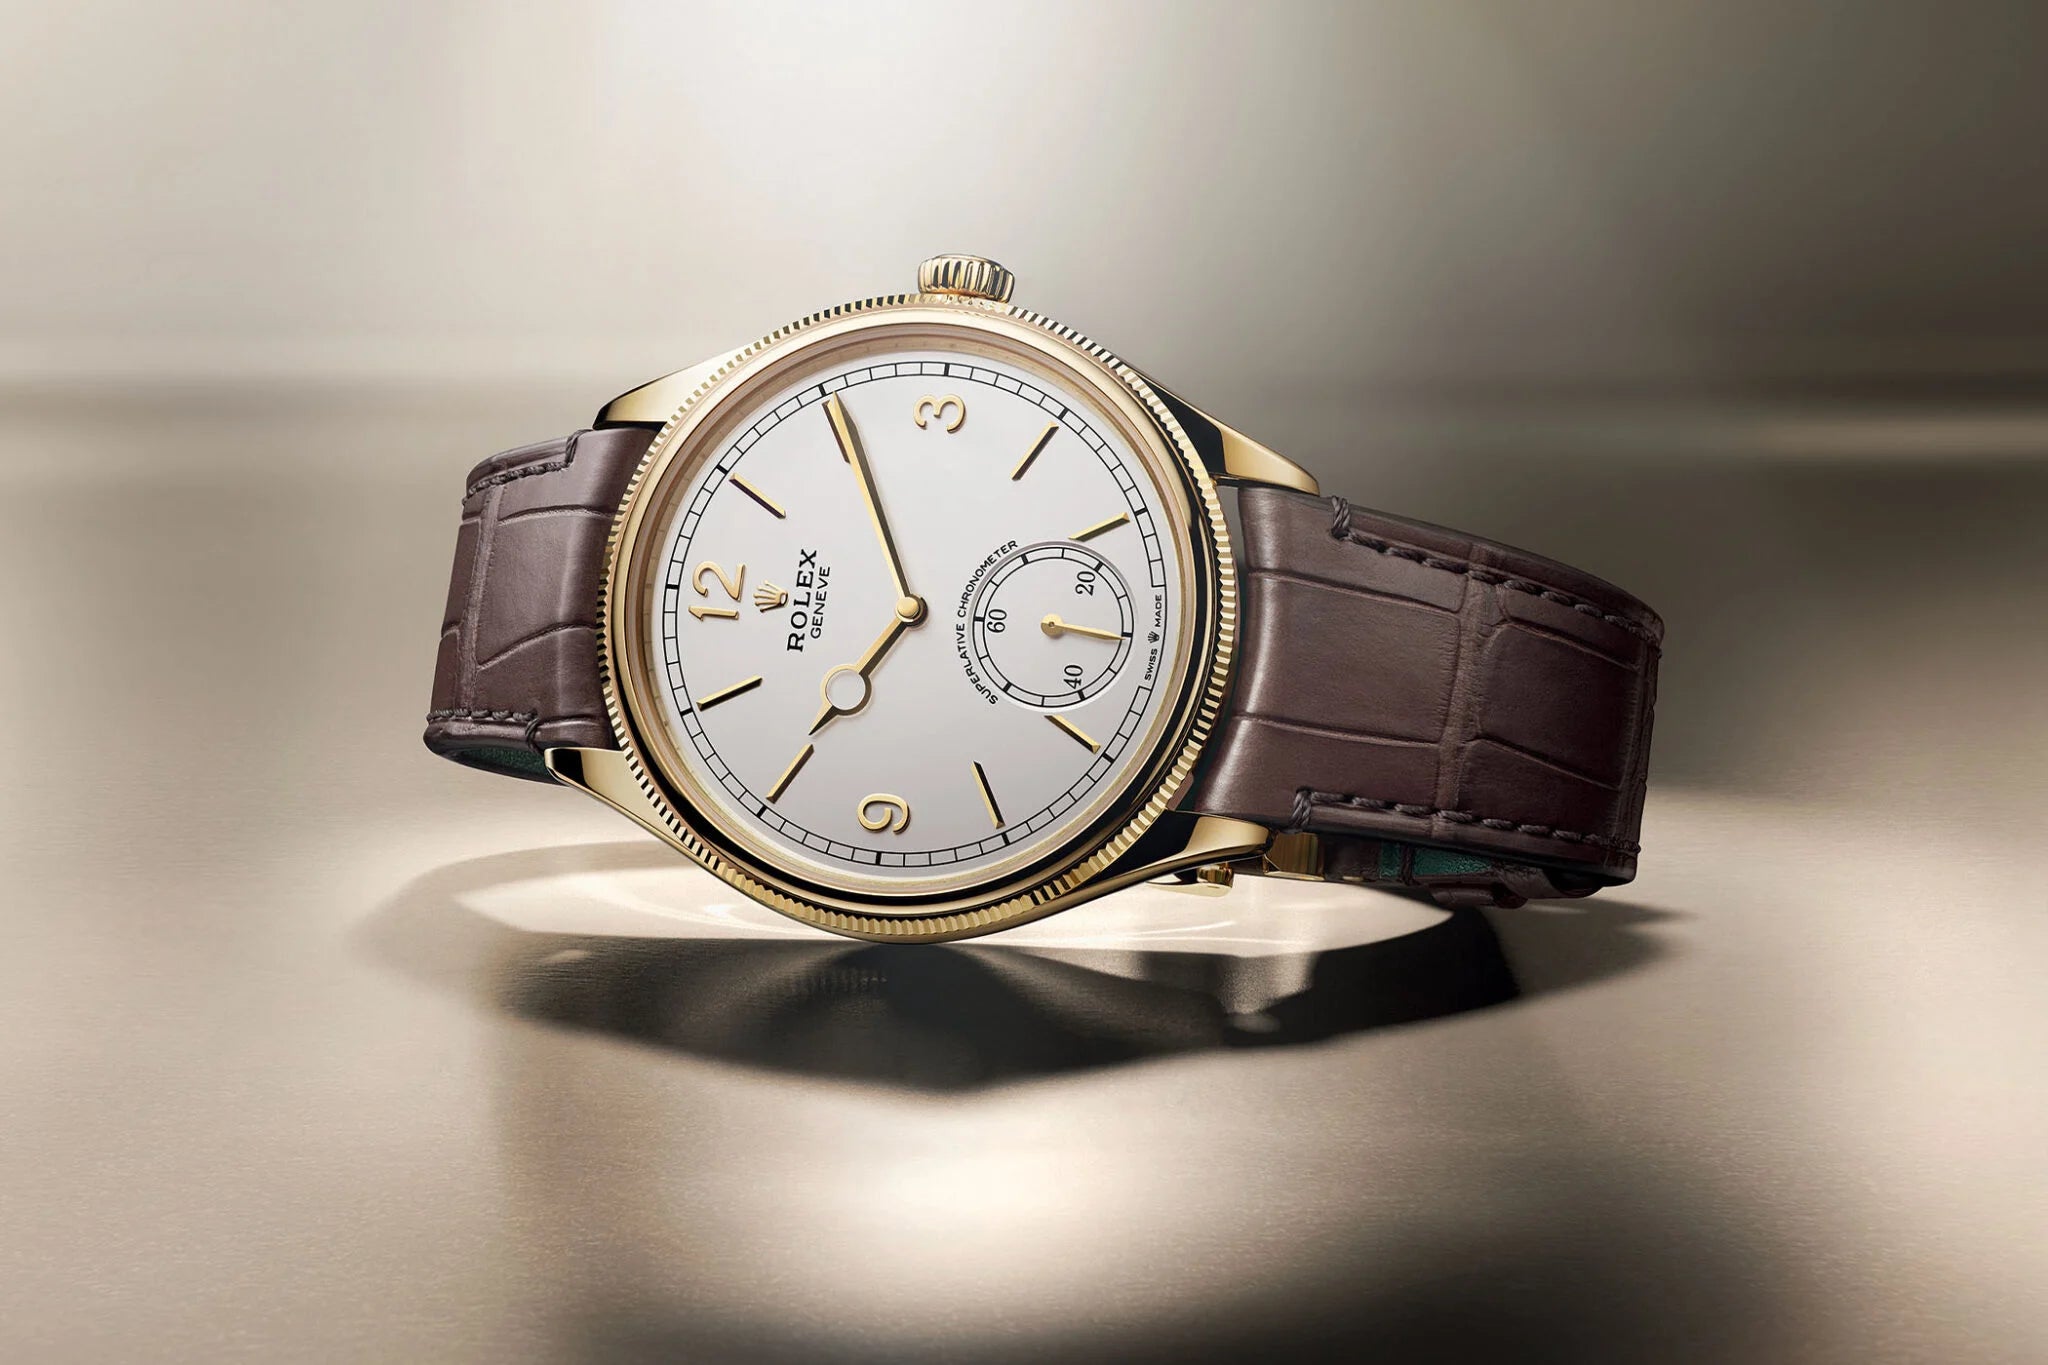 Watches of Switzerland should be worried about its Rolexes